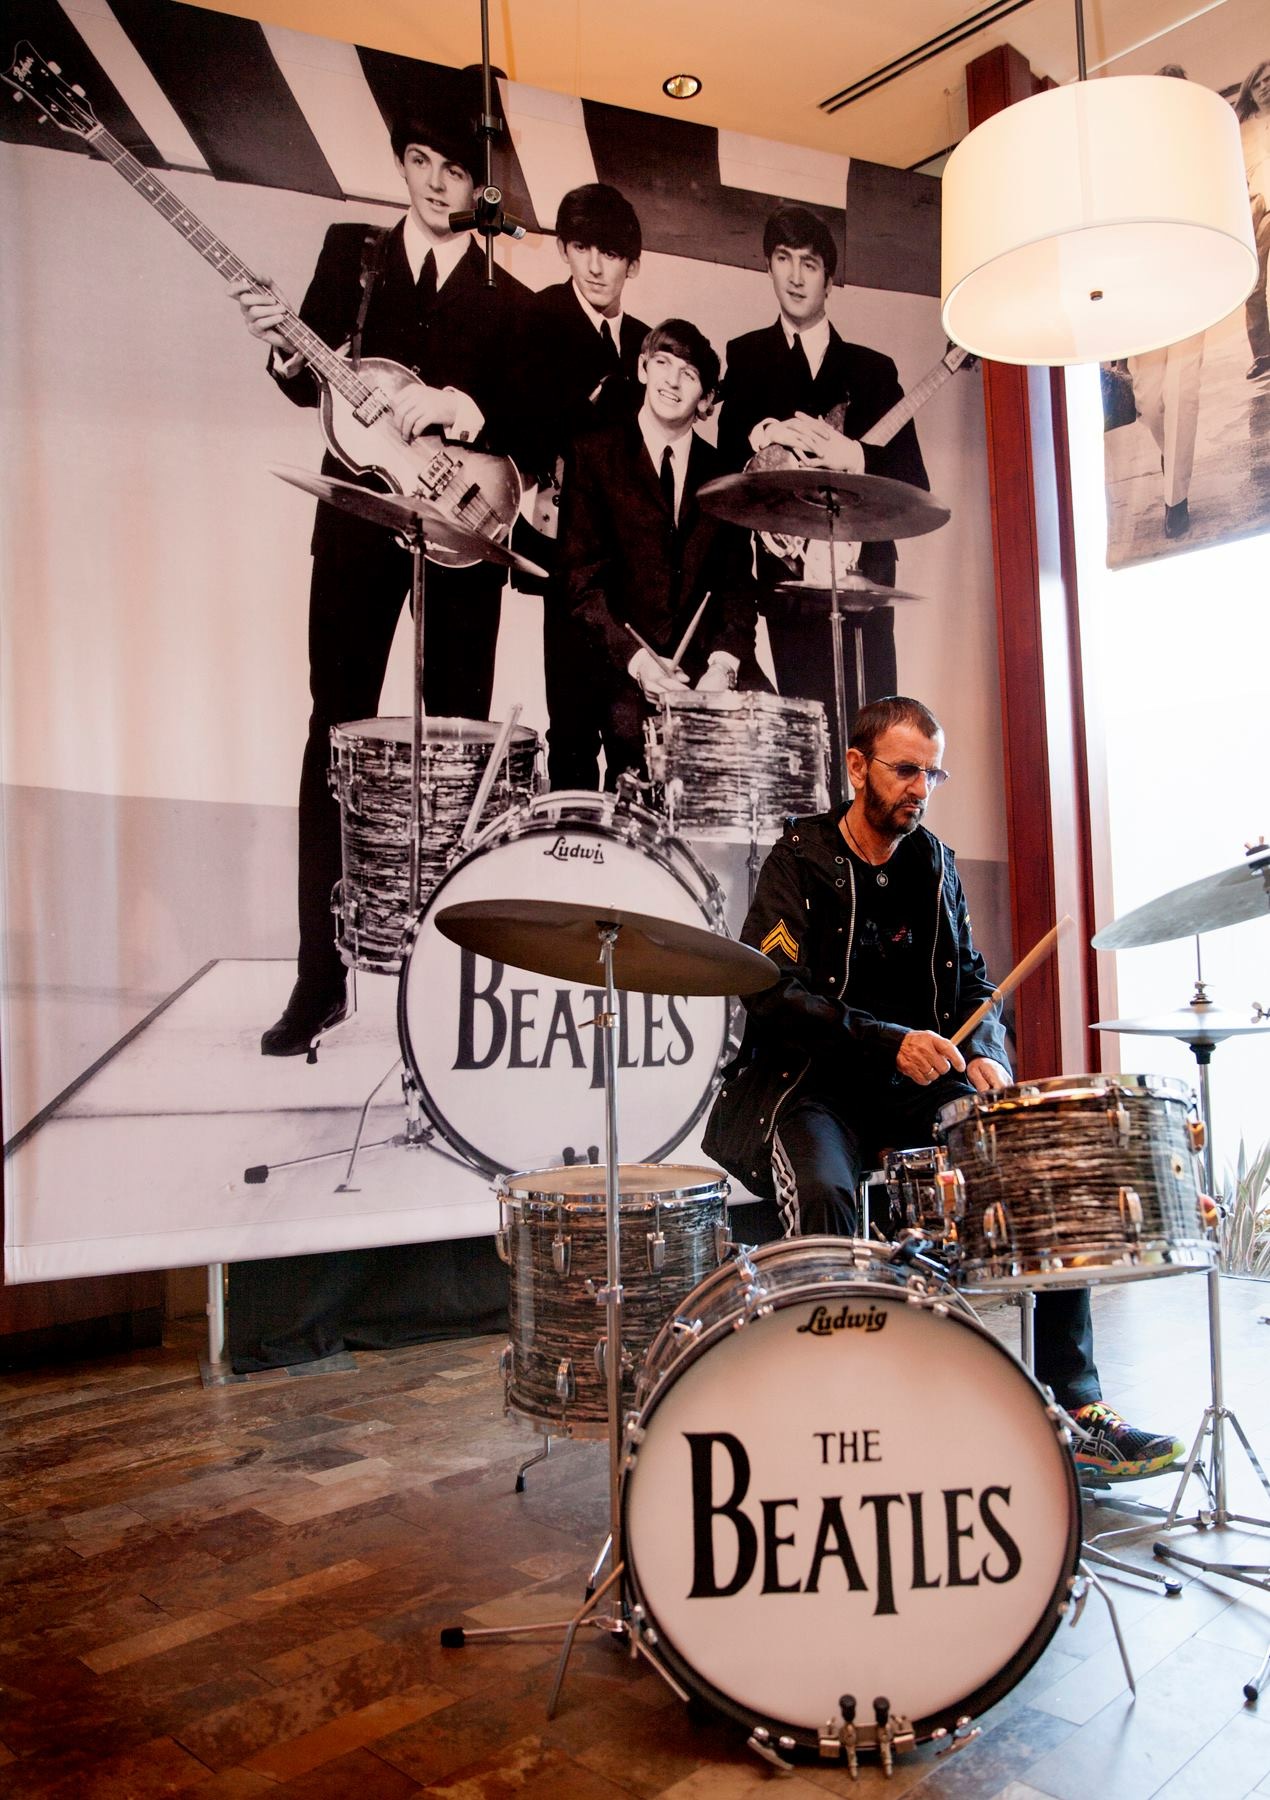 A first hand account of Ringo's auction of drums and personal items